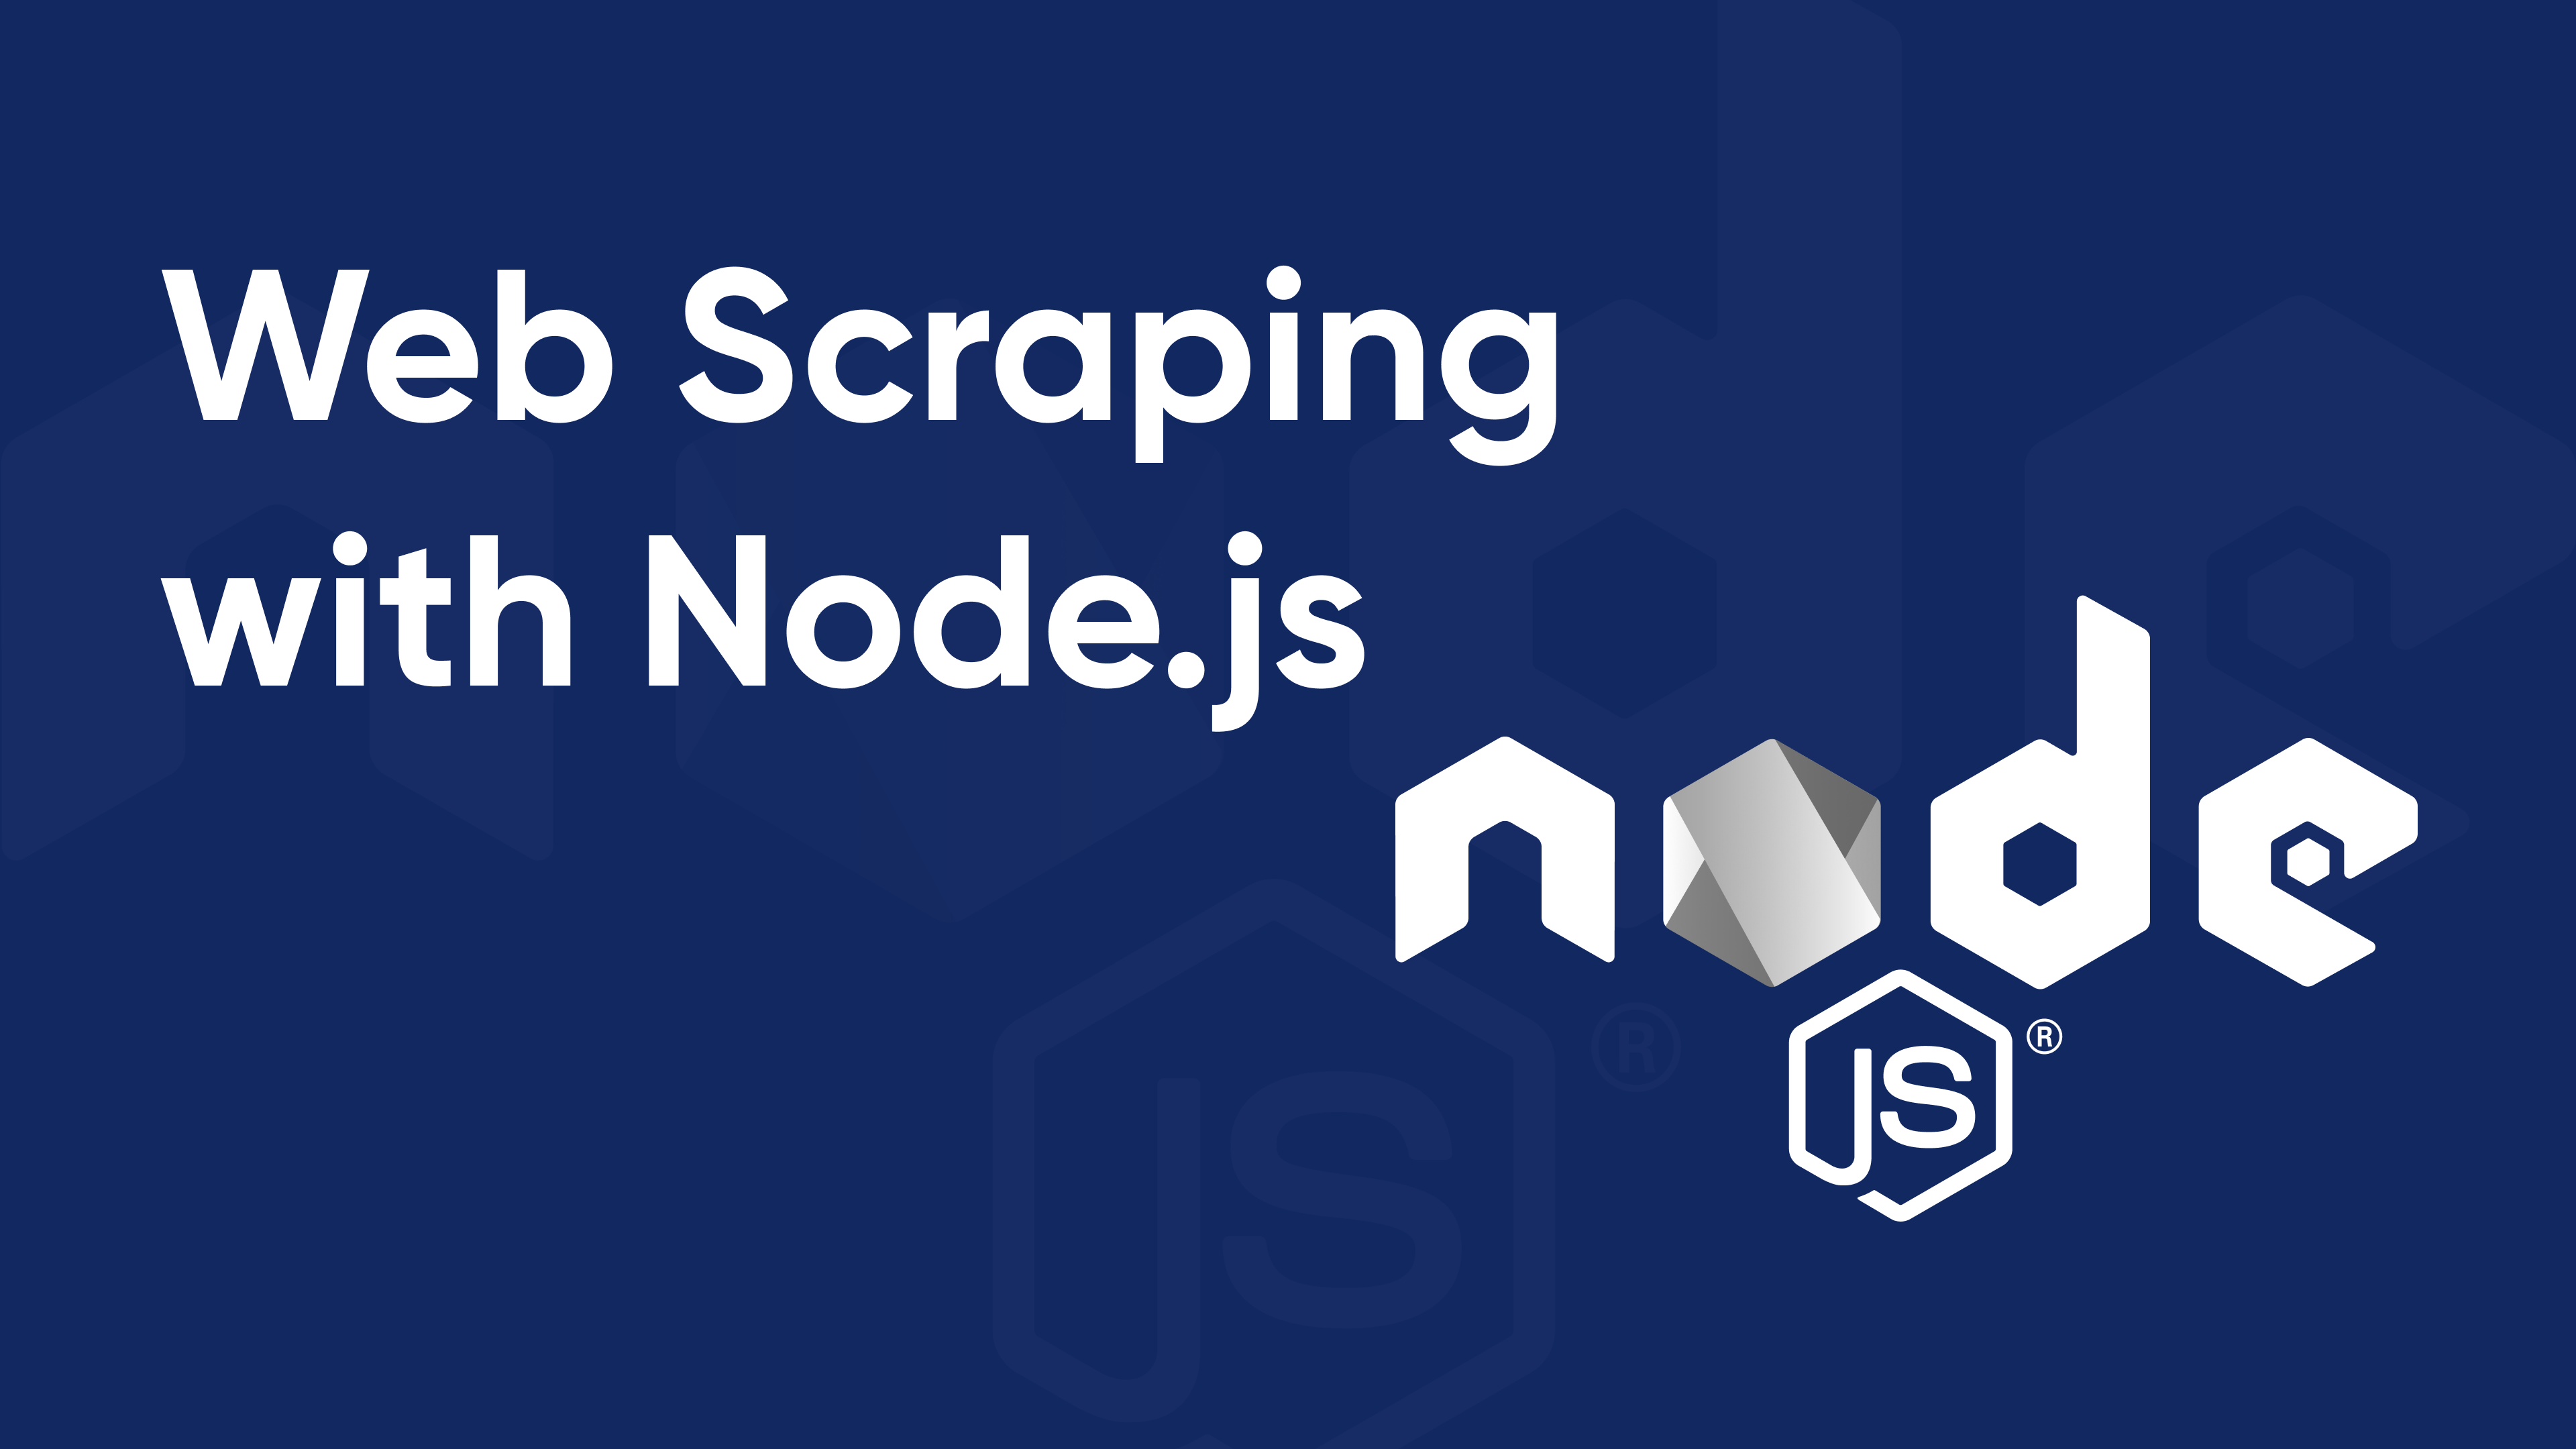 Web Scraping with Node.js: How to Leverage the Power of JavaScript